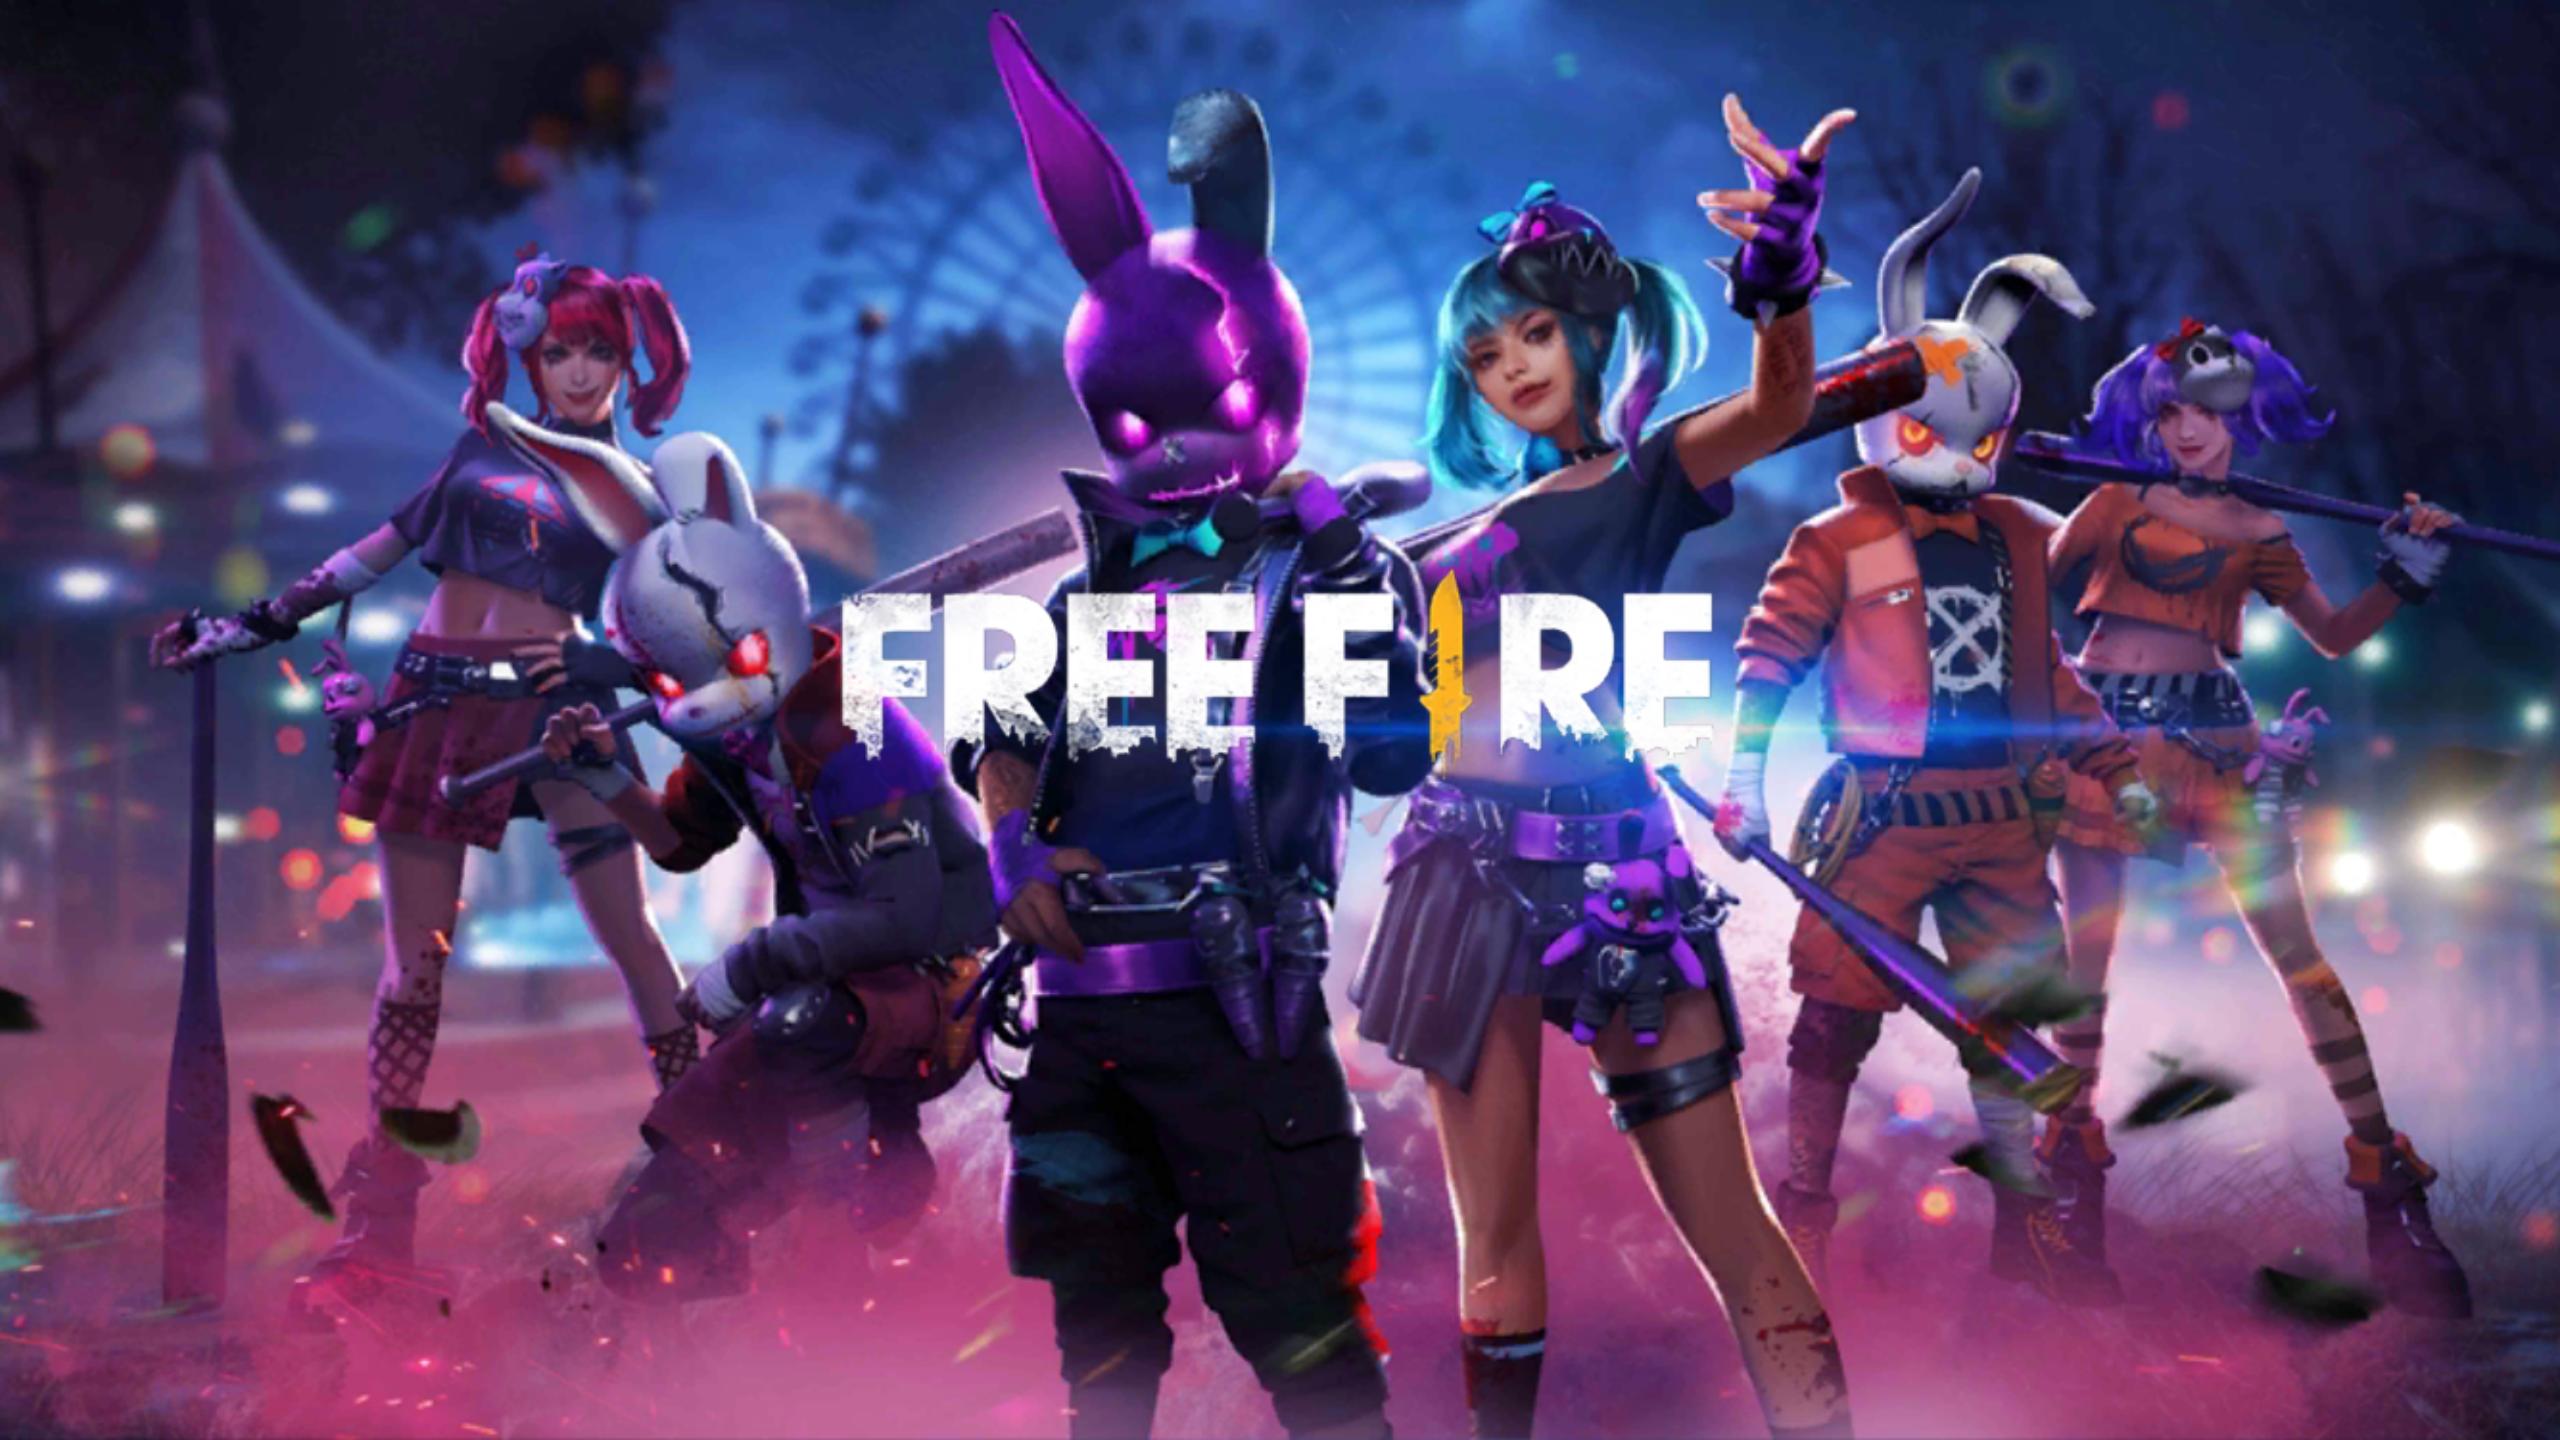 Free Guide For Free Fire 2020 for Android - APK Download